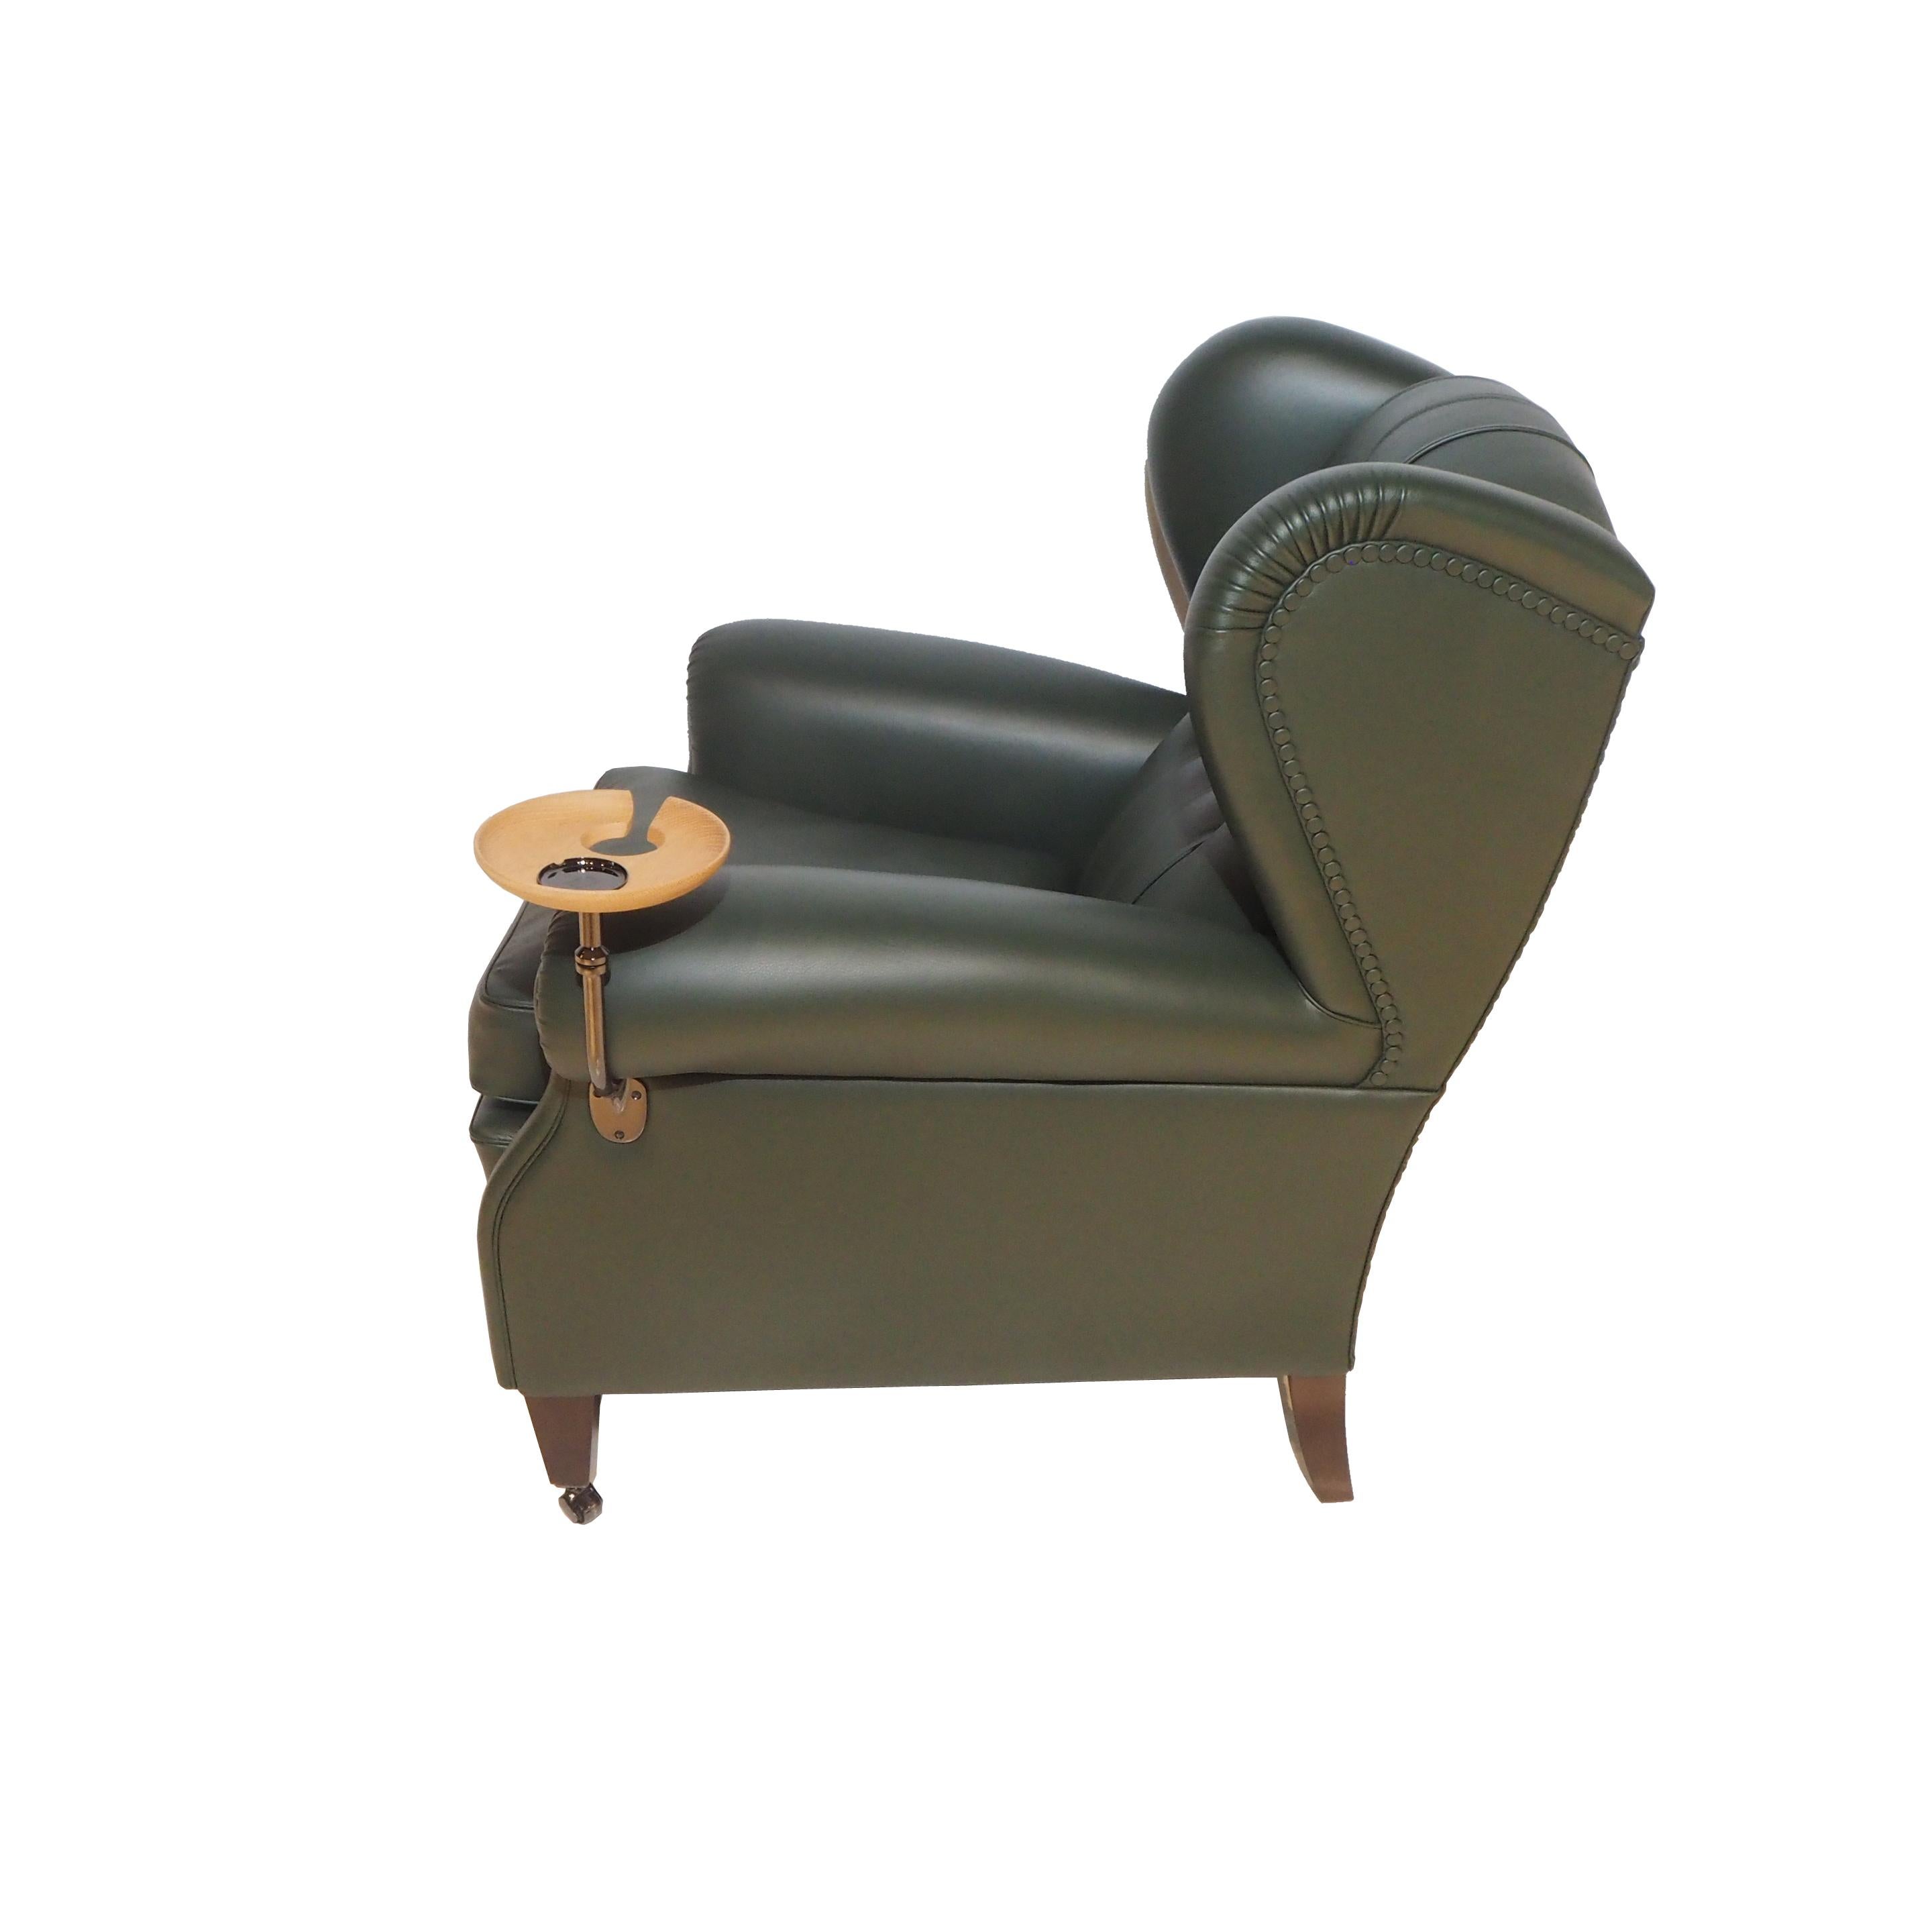 The “1919” armchair, named after the year in which it was designed, is actually archived under the code “128”. It is thought that it was custom-designed by Renzo Frau for Filiberto Ludovico of Savoy, Duke of Pistoia. Despite being commissioned by a